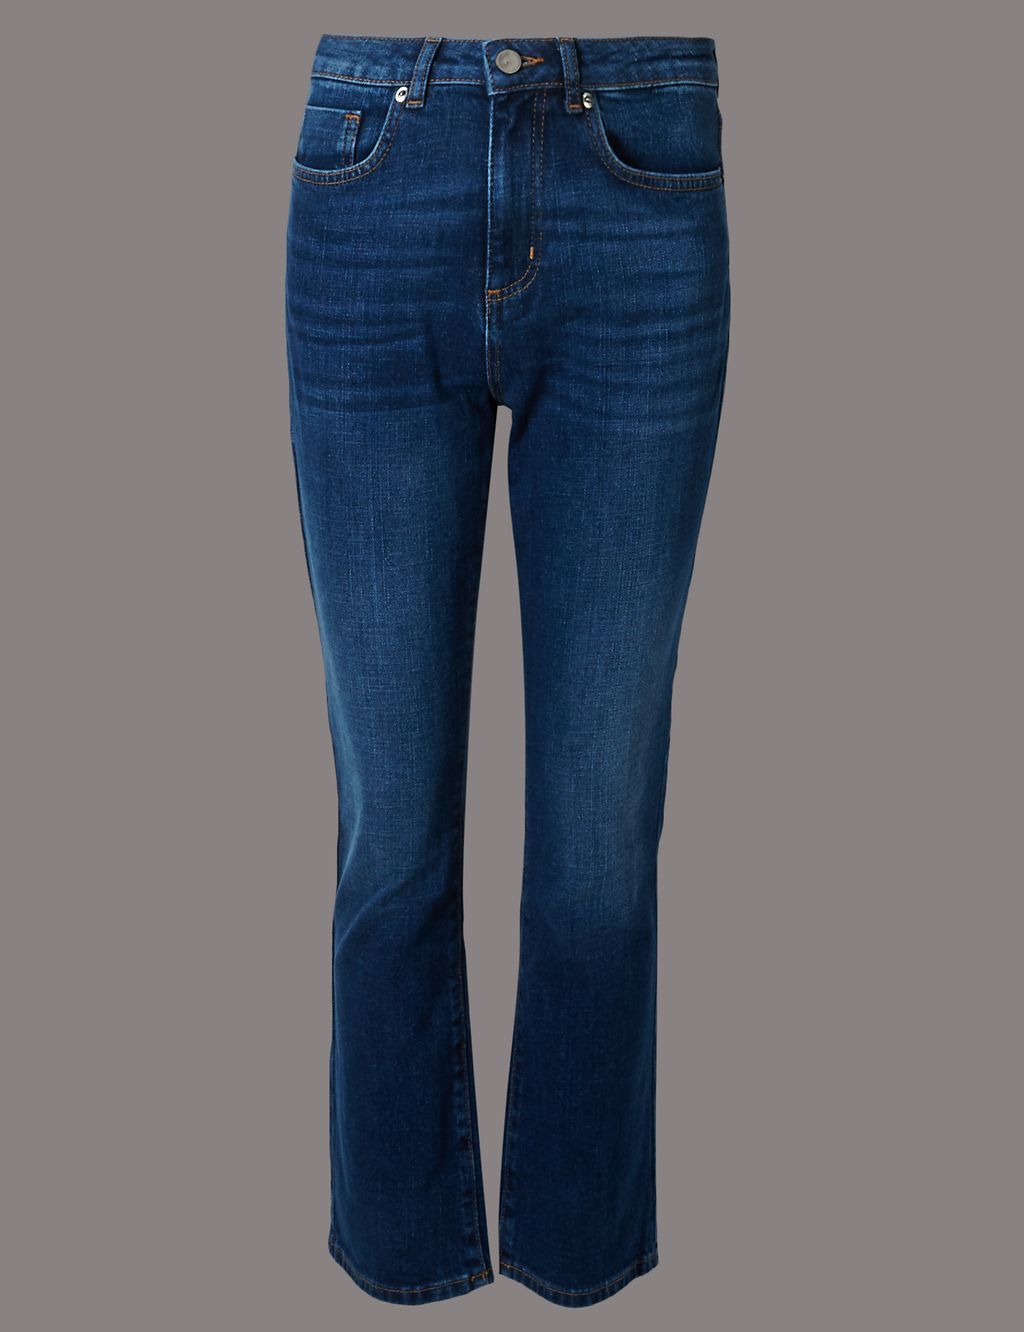 Demi Boot Mid Rise Flare Jeans 1 of 6